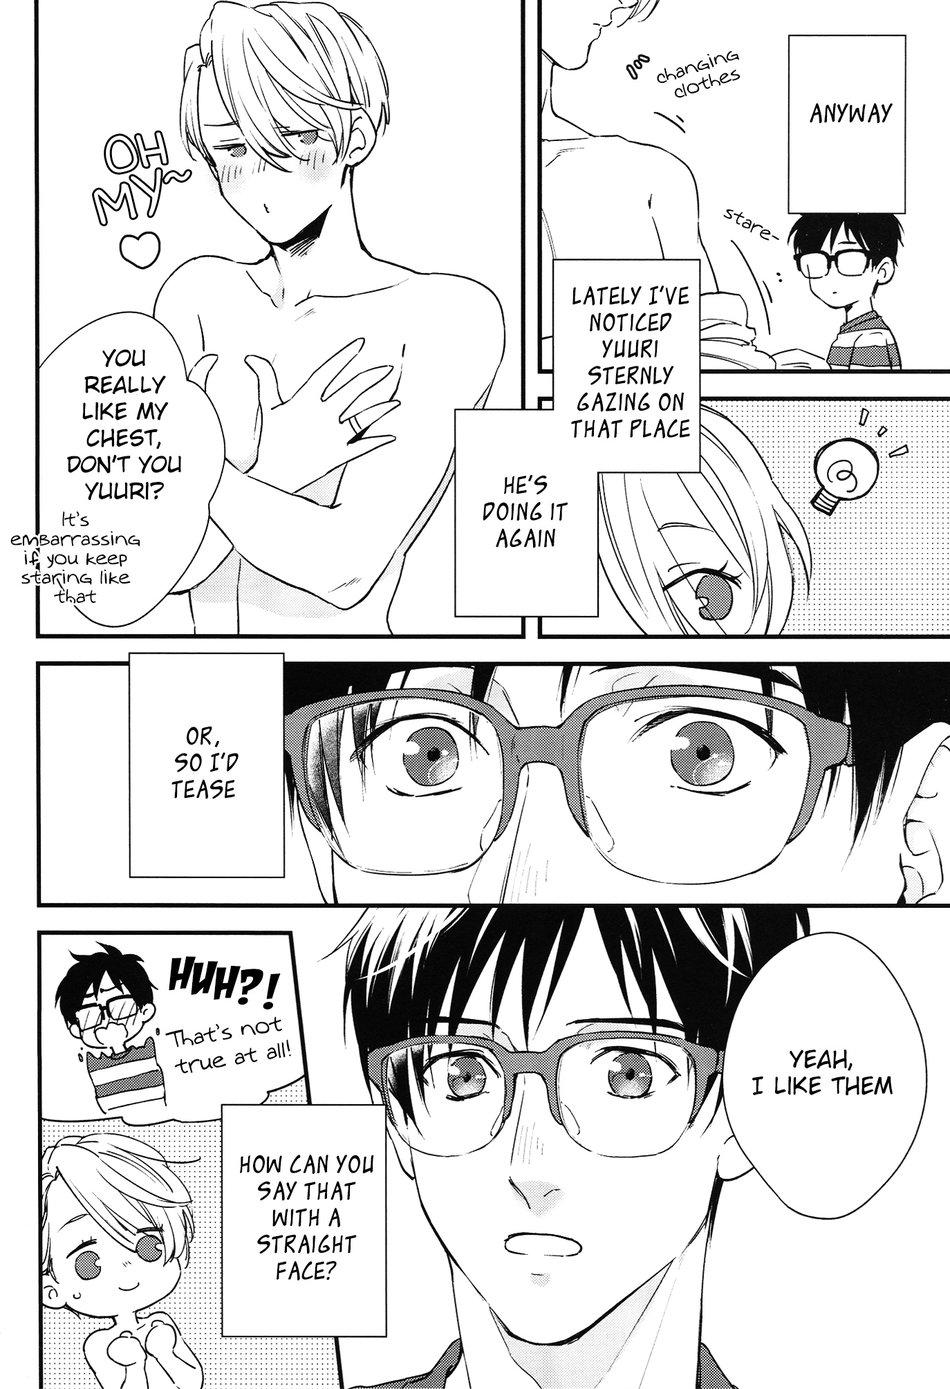 Men Love Me, Touch Me - Yuri on ice Calle - Page 8